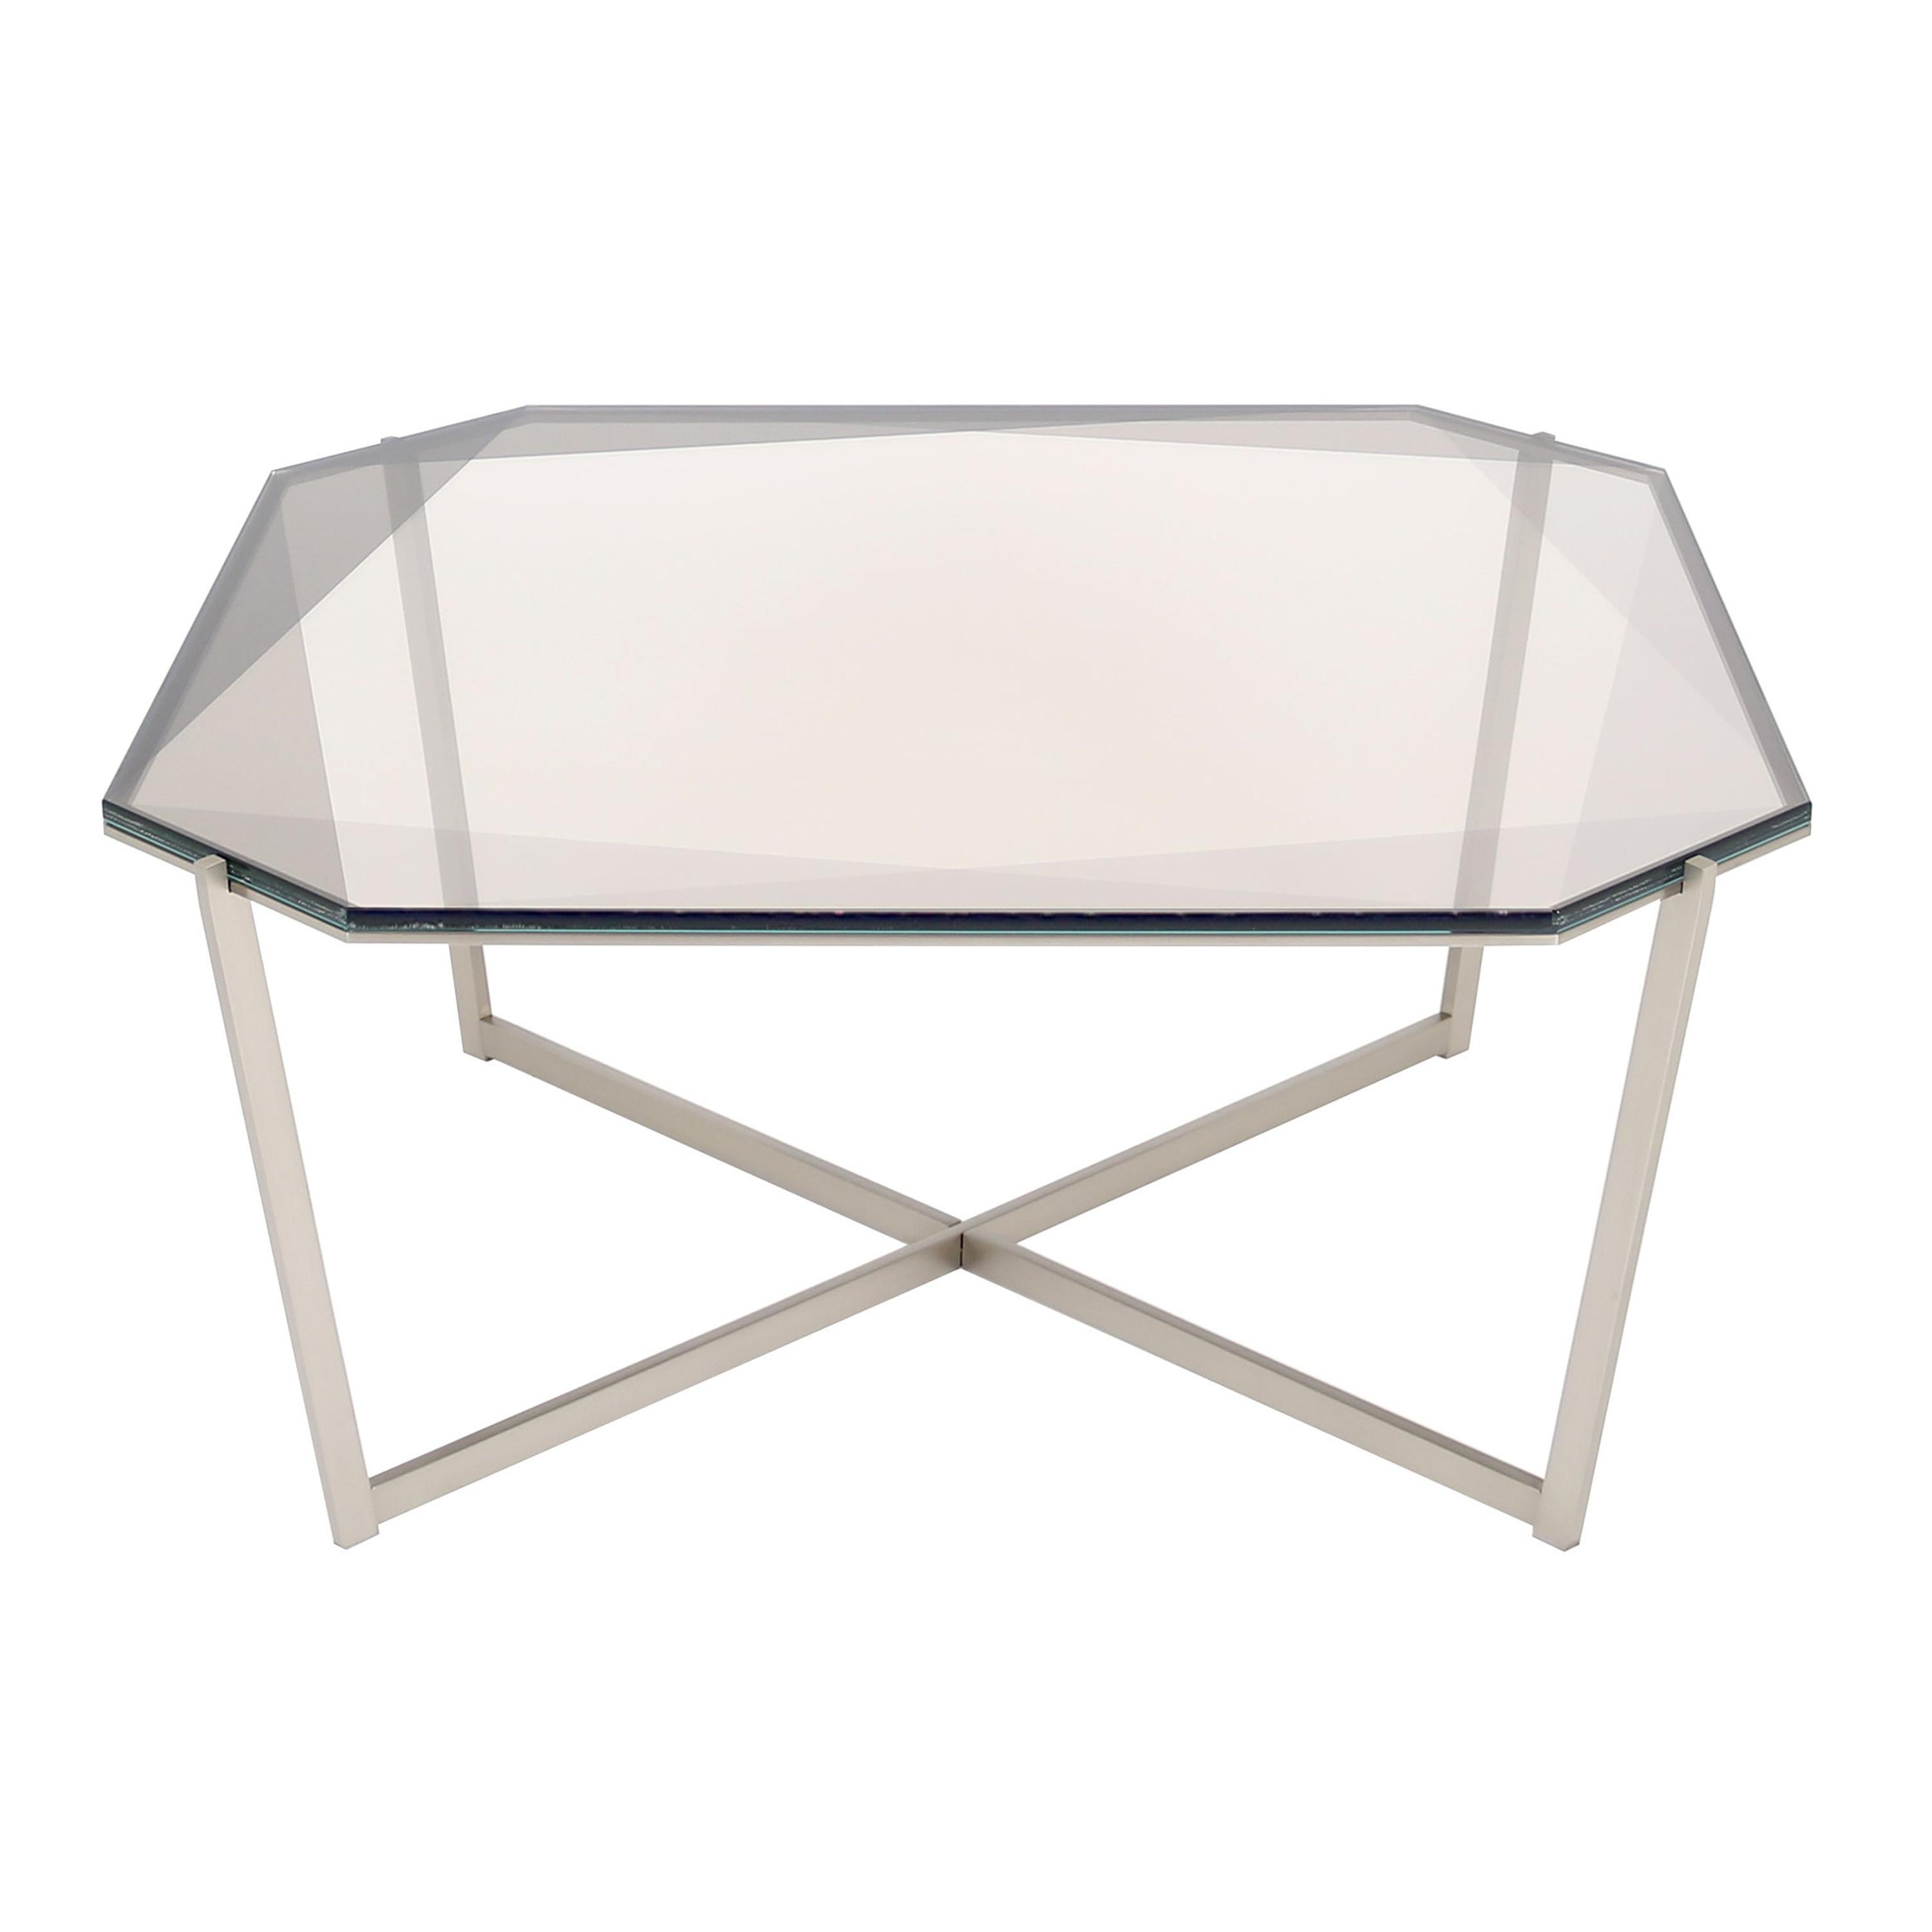 Gem Square Coffee Table-Smoke Glass with Stainless Steel Base by Debra Folz